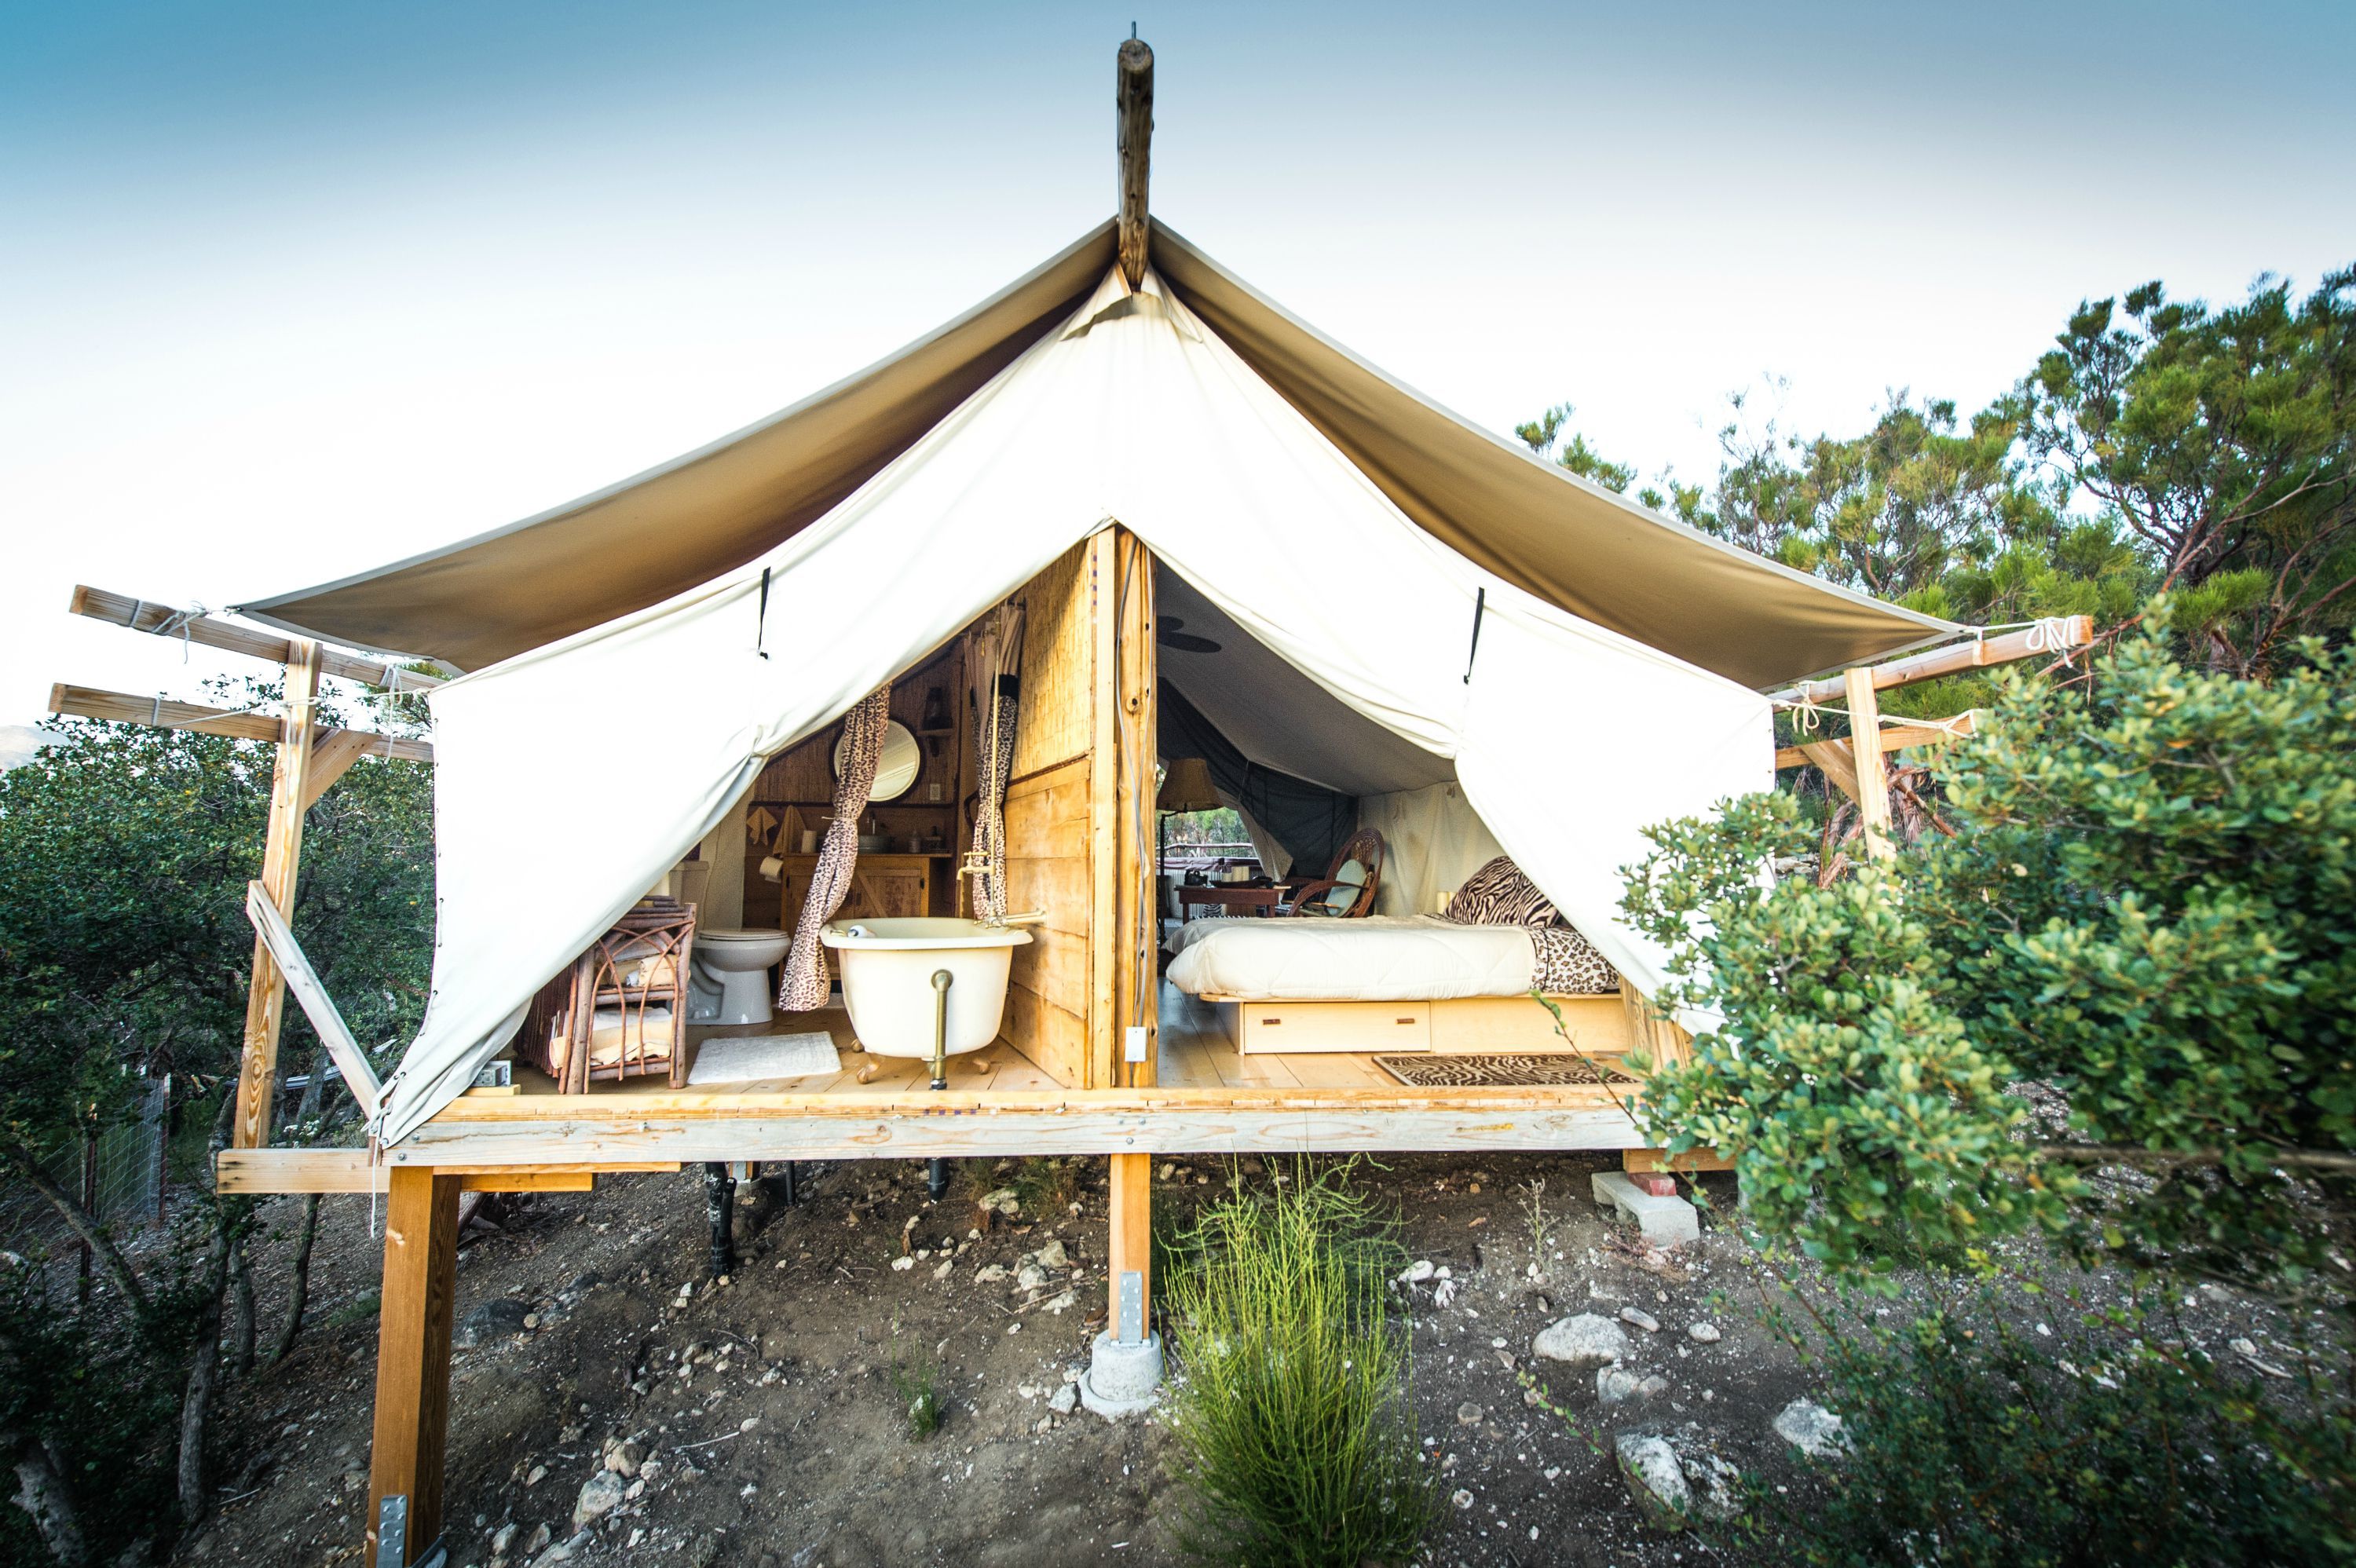 20 Best Glamping Sites in the U.S. - Top Luxury Camping Dest